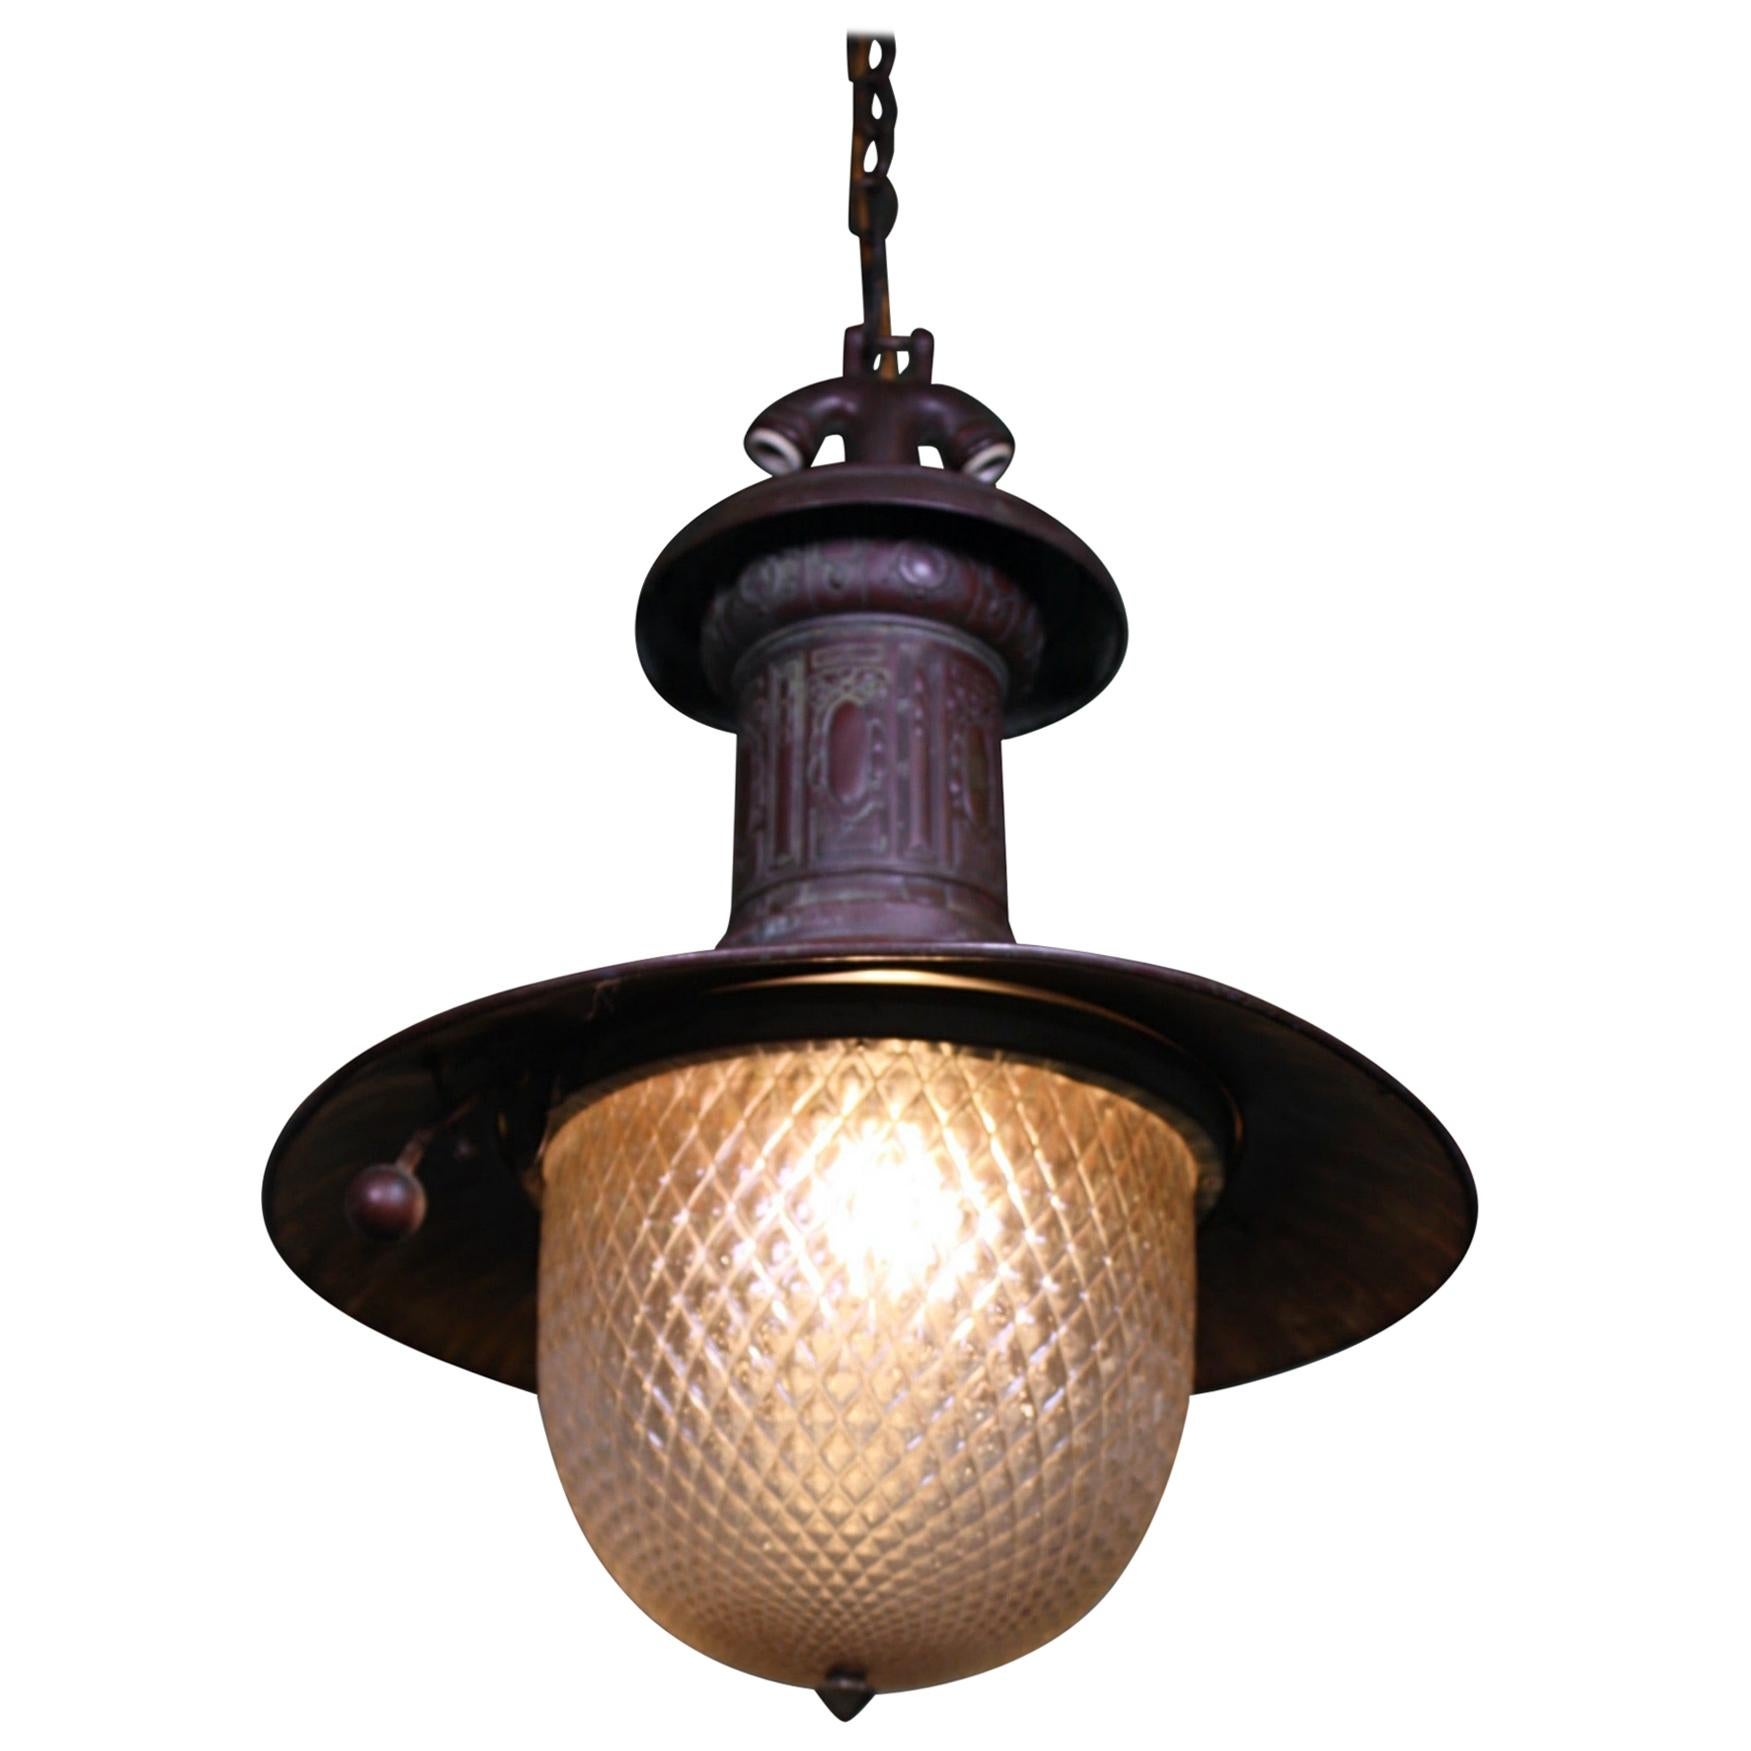 Unusual Turn of the Century Copper and Quilted Glass Gas Lantern Light